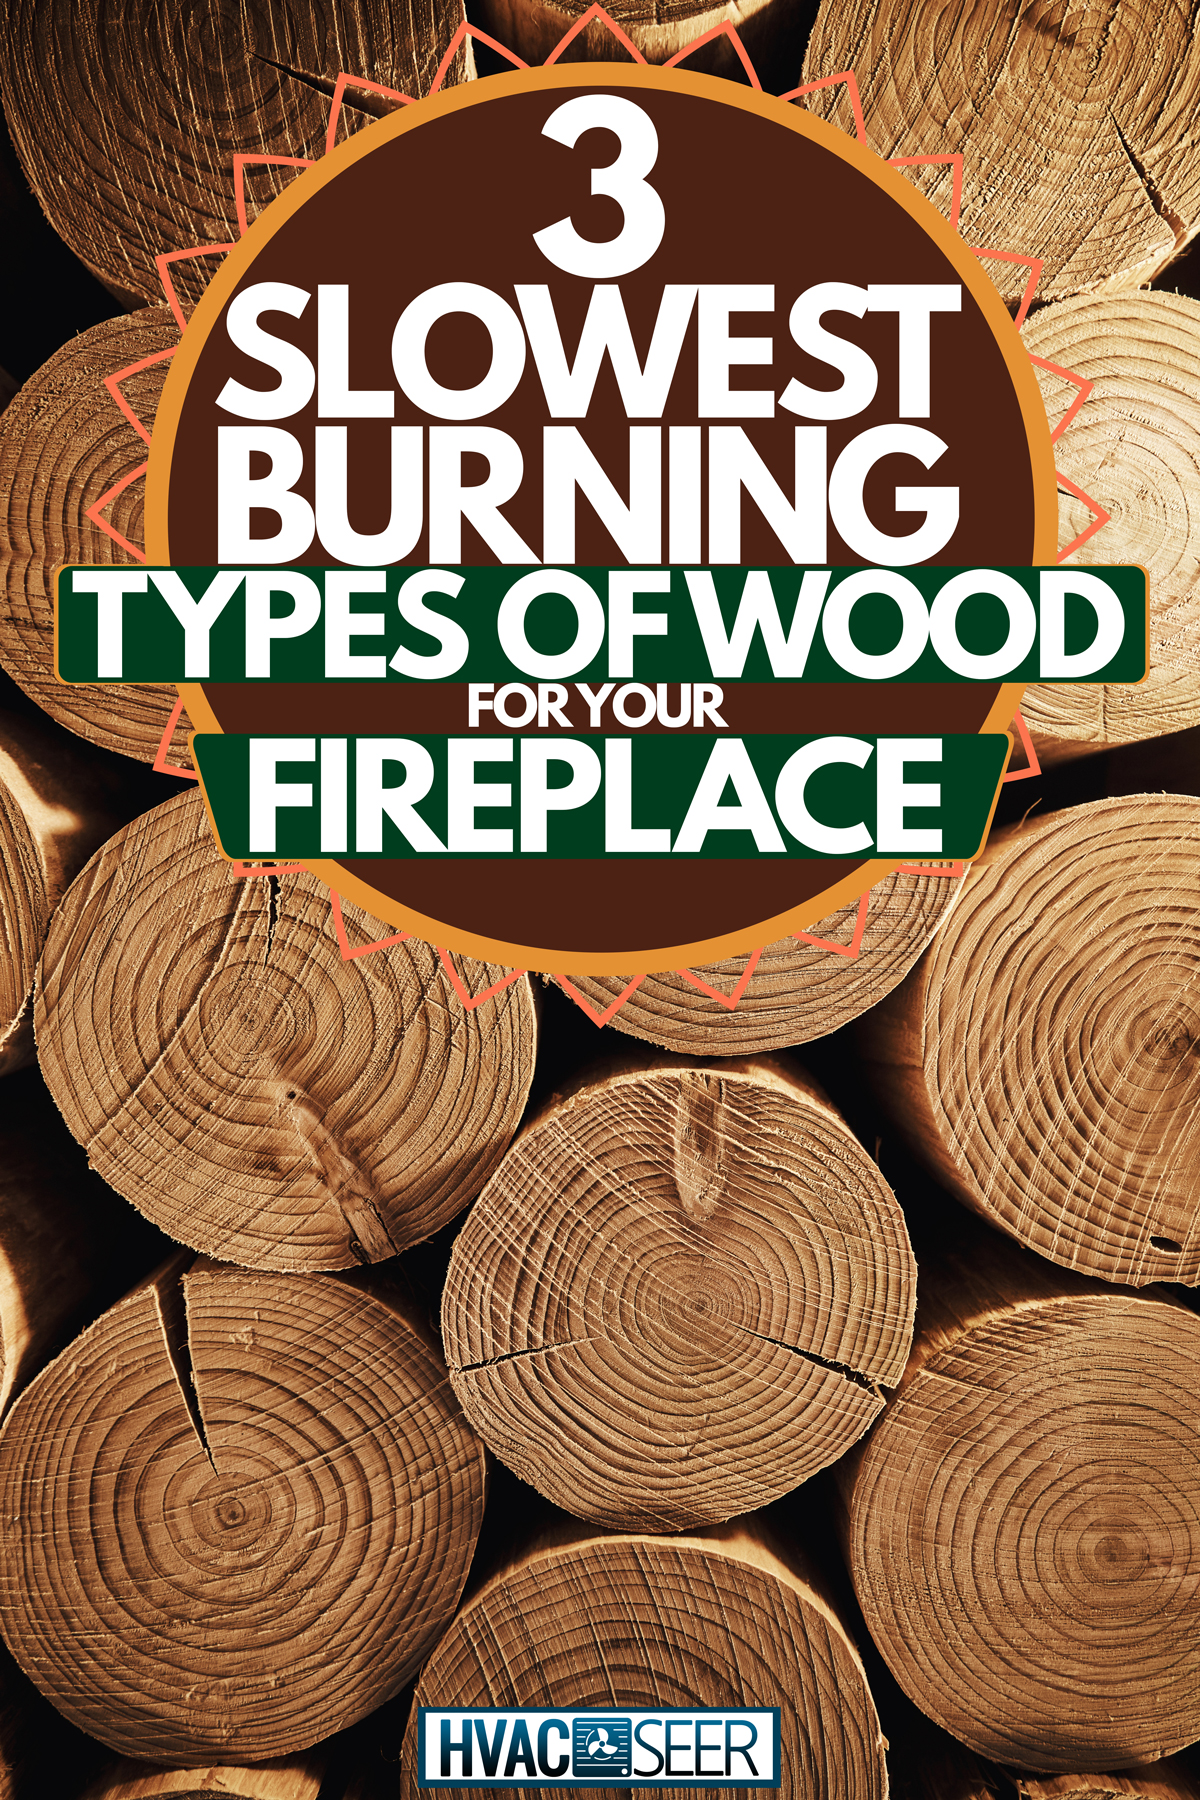 A seasoned oak firewood stacked for a kiln dry, 3 Slowest Burning Types of Wood for your Fireplace